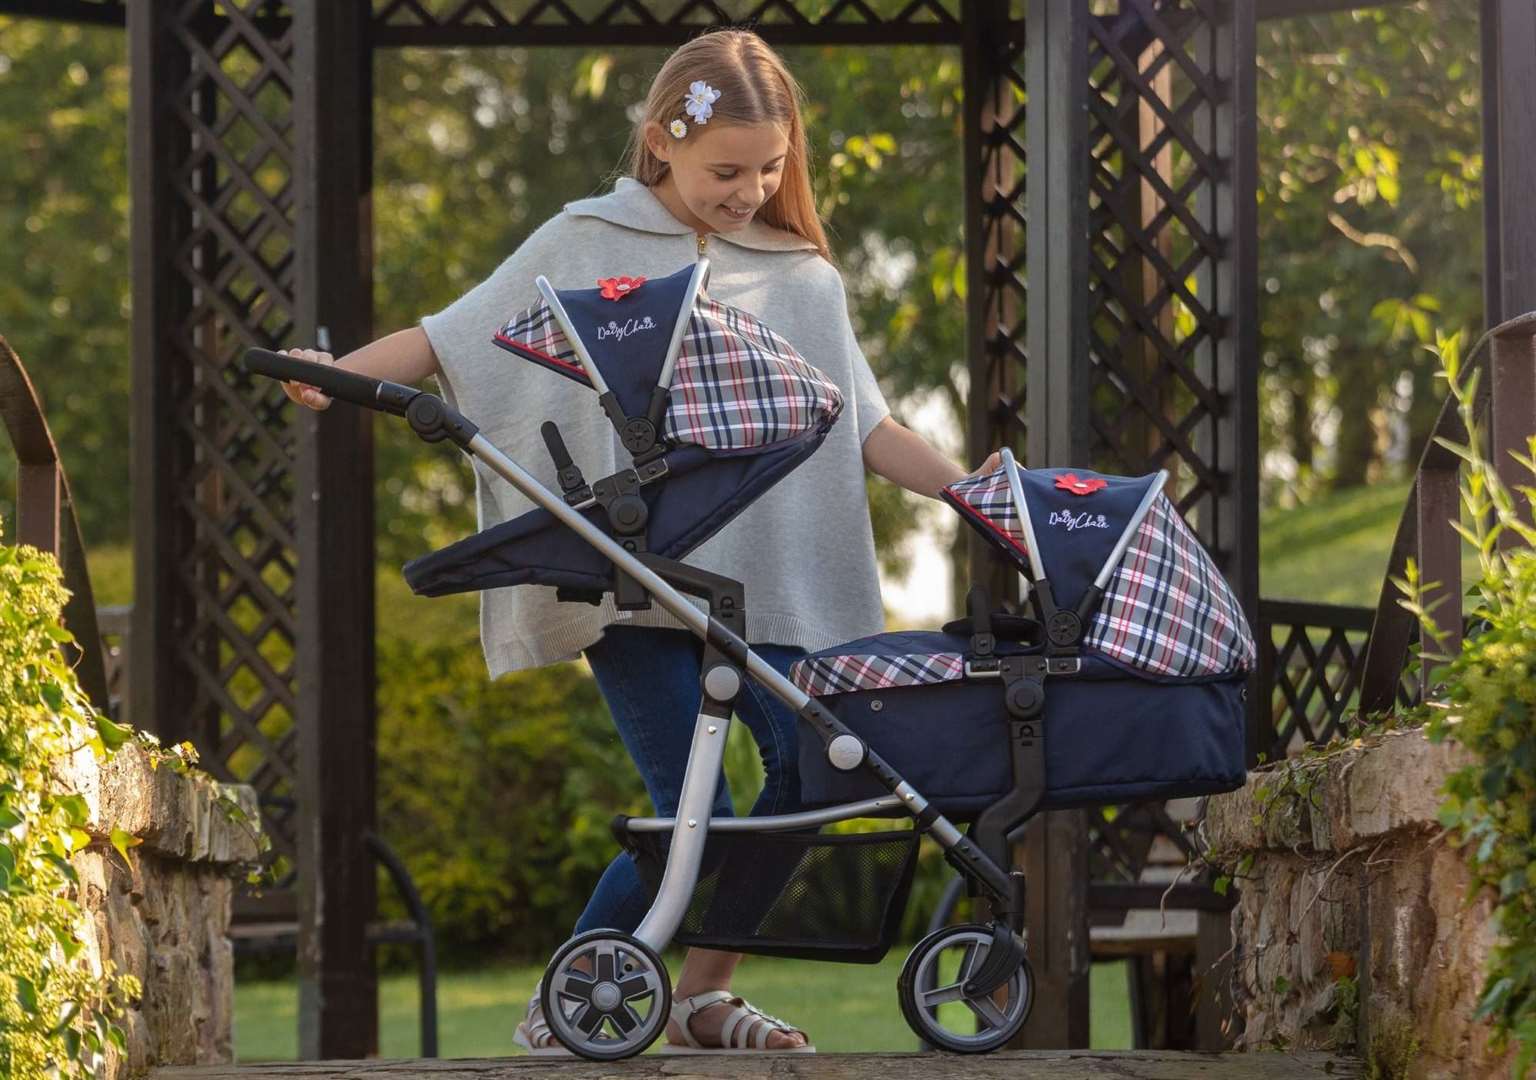 Andrew Coplestone founder of premium dolls’ pram provider Play Like Mum, says retailers, manufacturers and shoppers face a tough Christmas